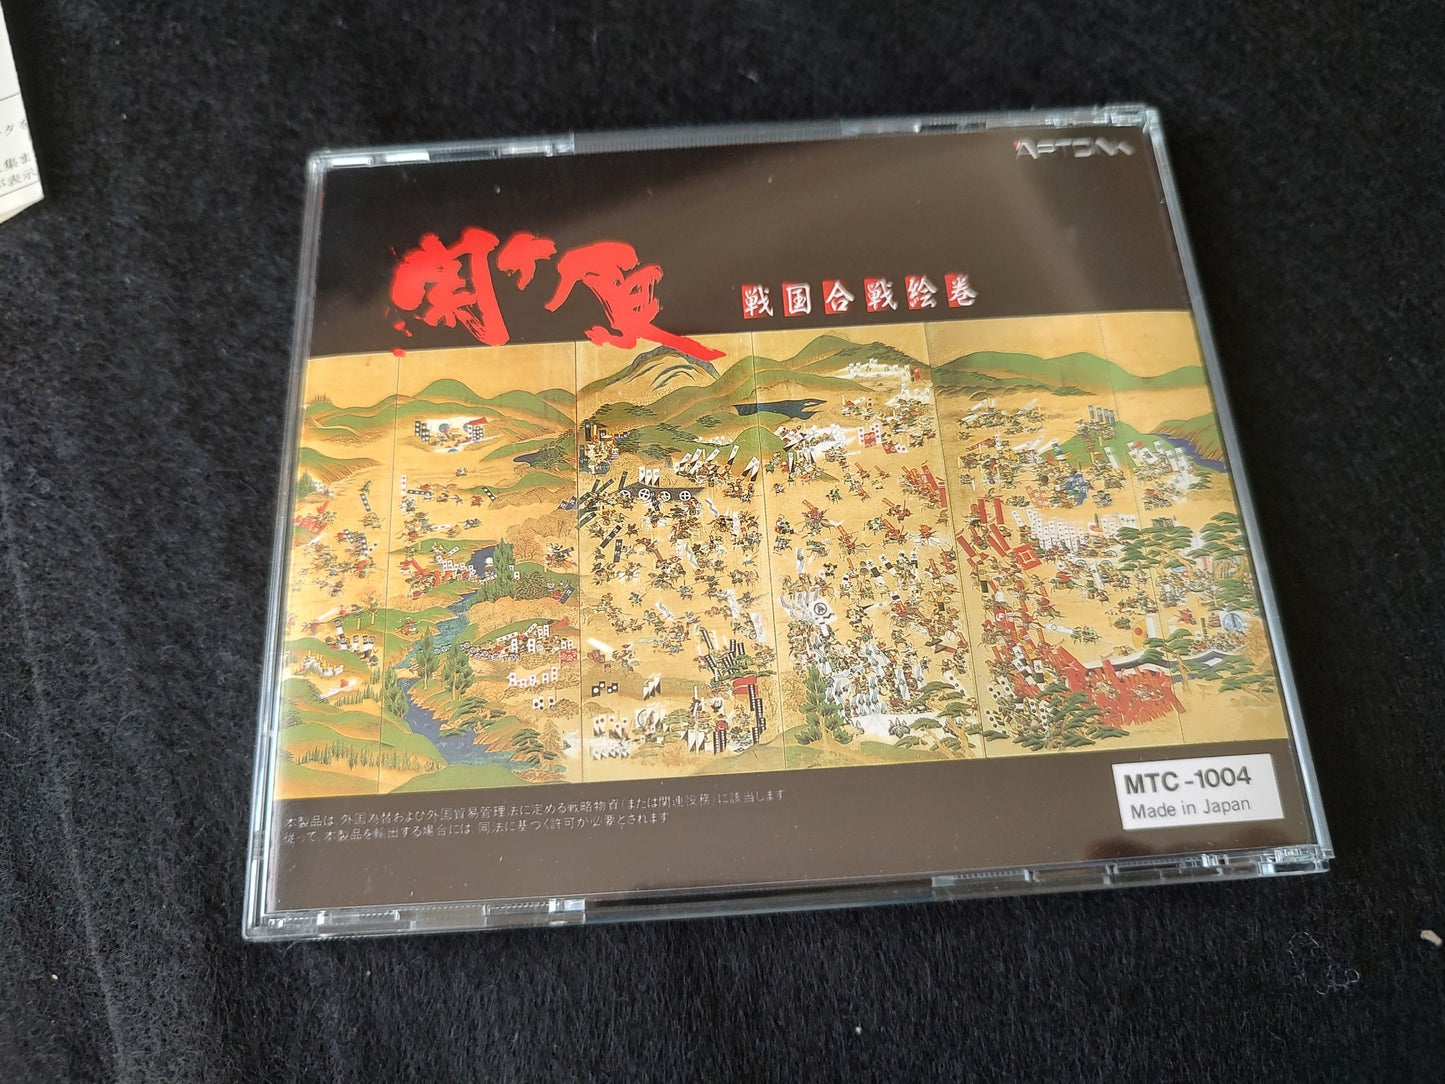 Sekigahara FM TOWNS Marty Game, Disk, w/Manual and Box set, Working-f0629-